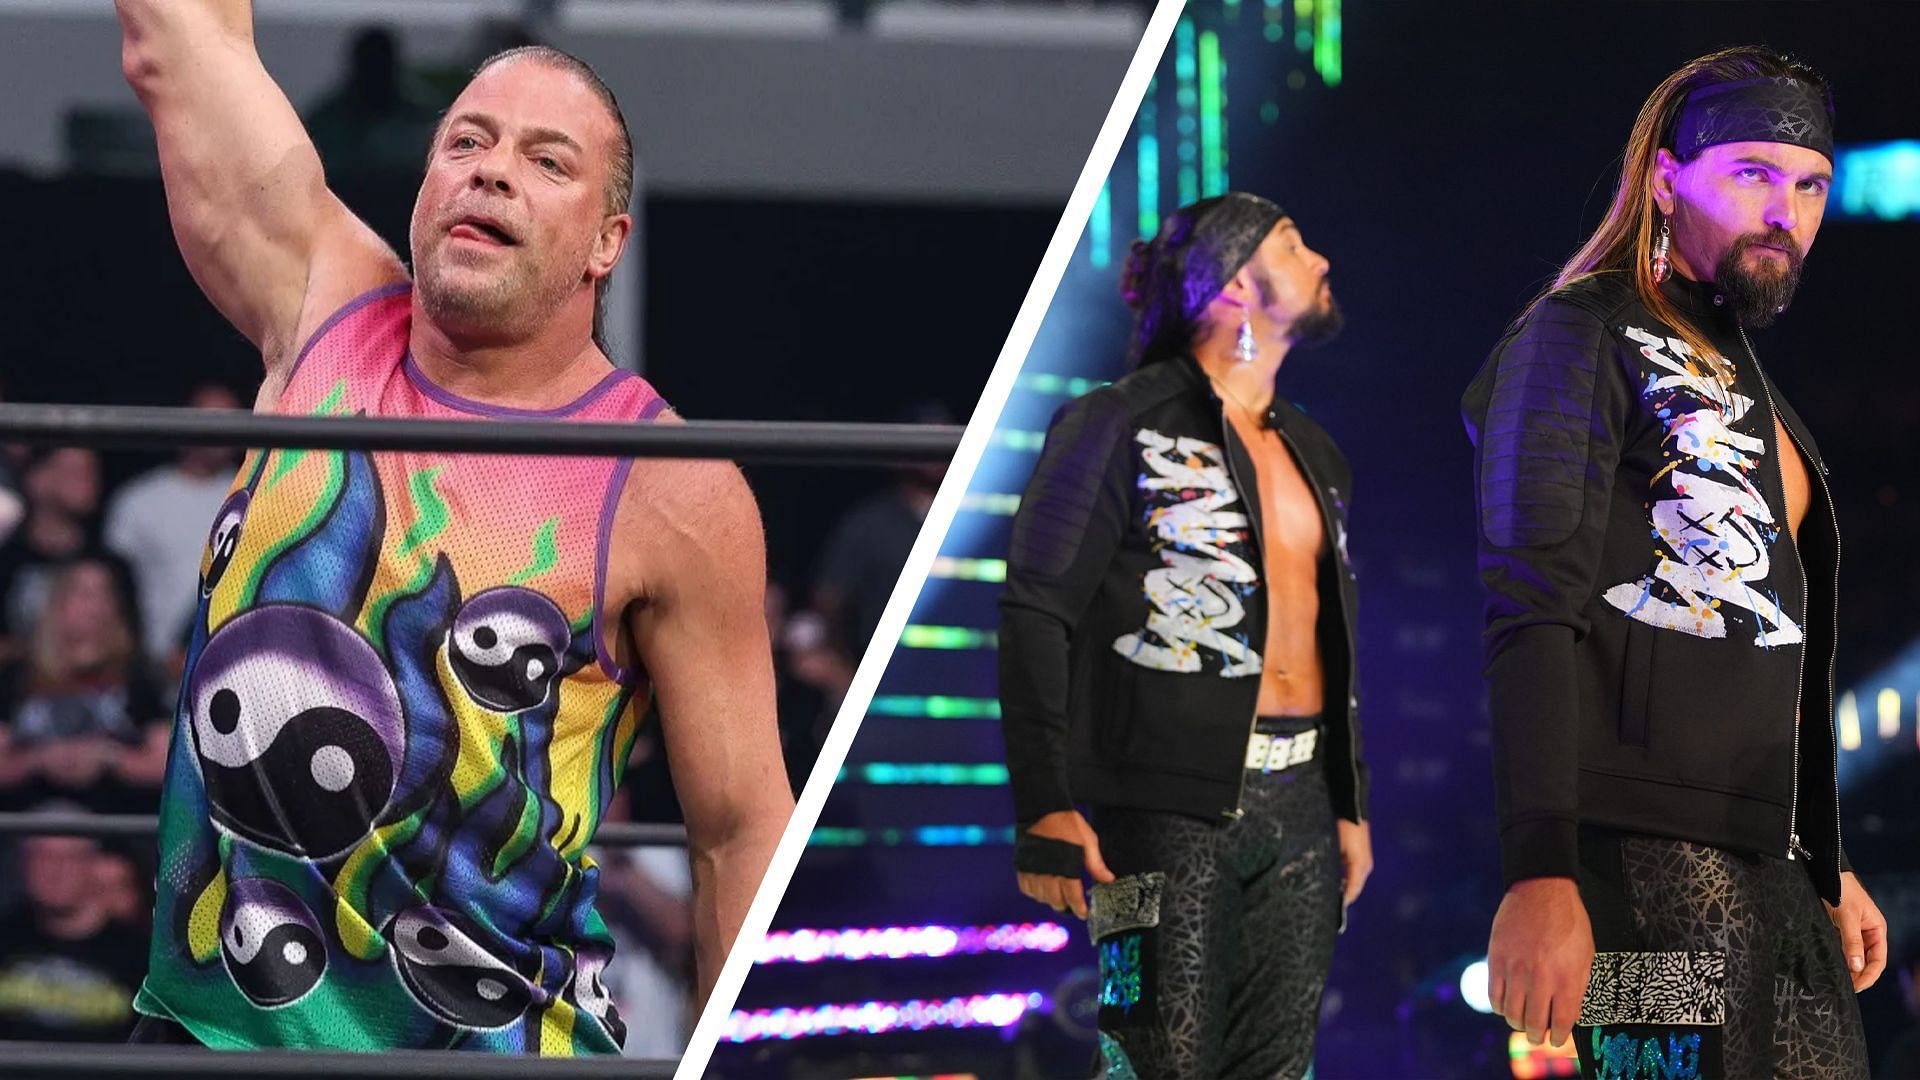 Did RVD have an issue with The Young Bucks?